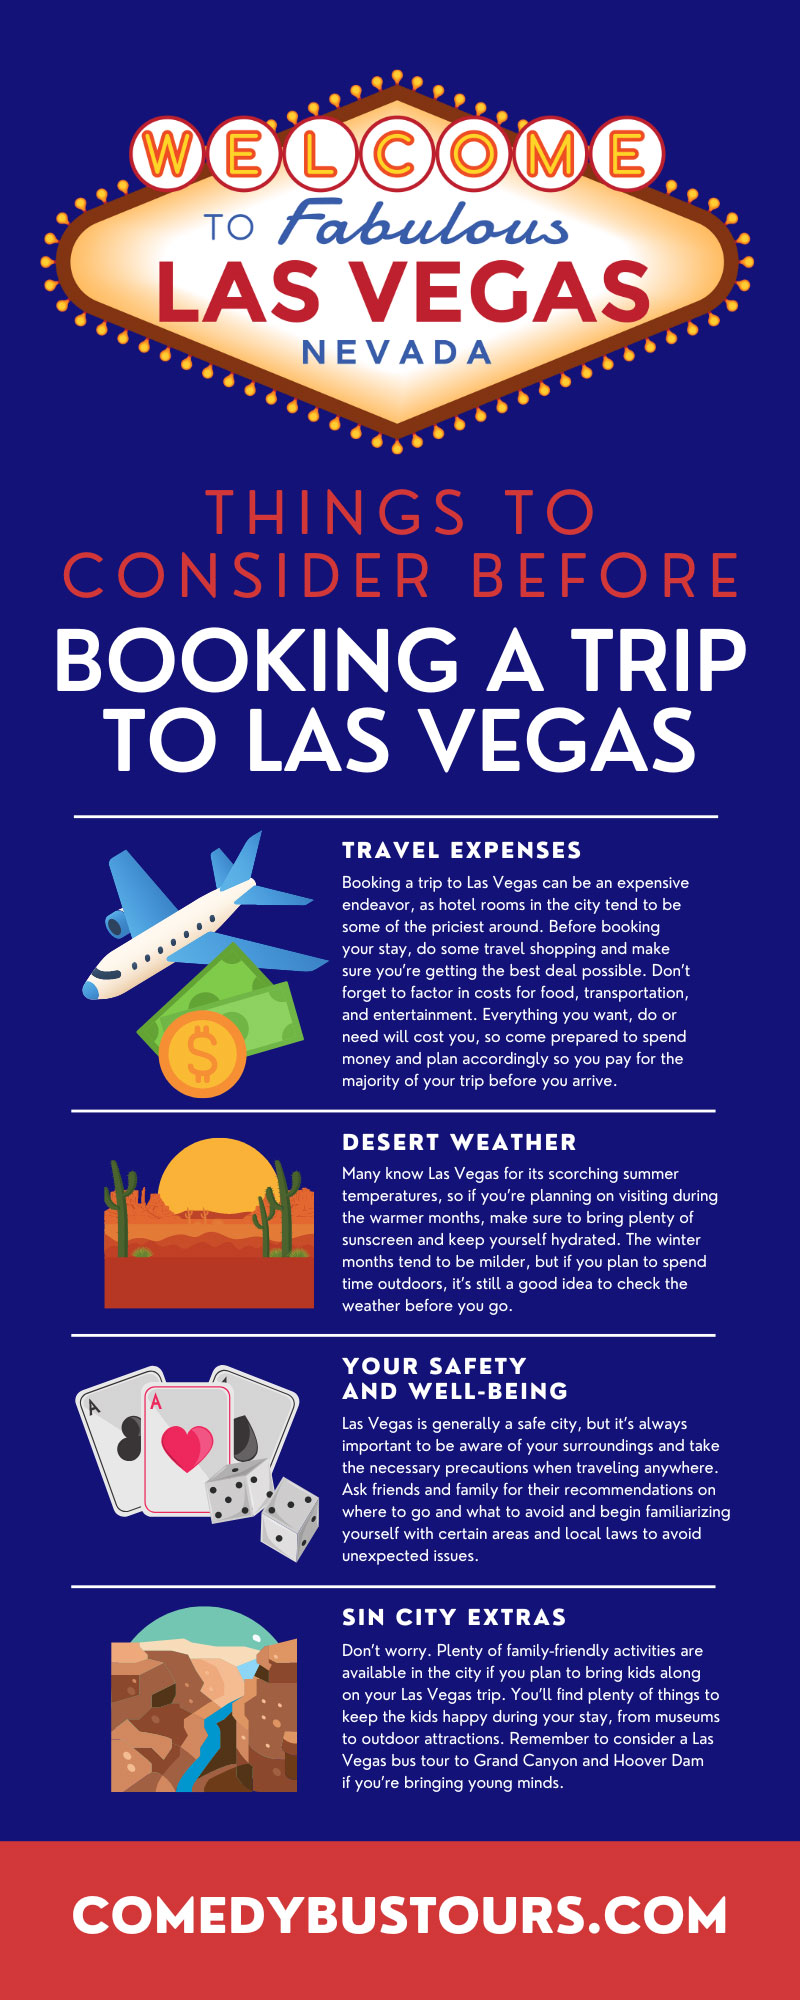 Things To Consider Before Booking a Trip to Las Vegas
